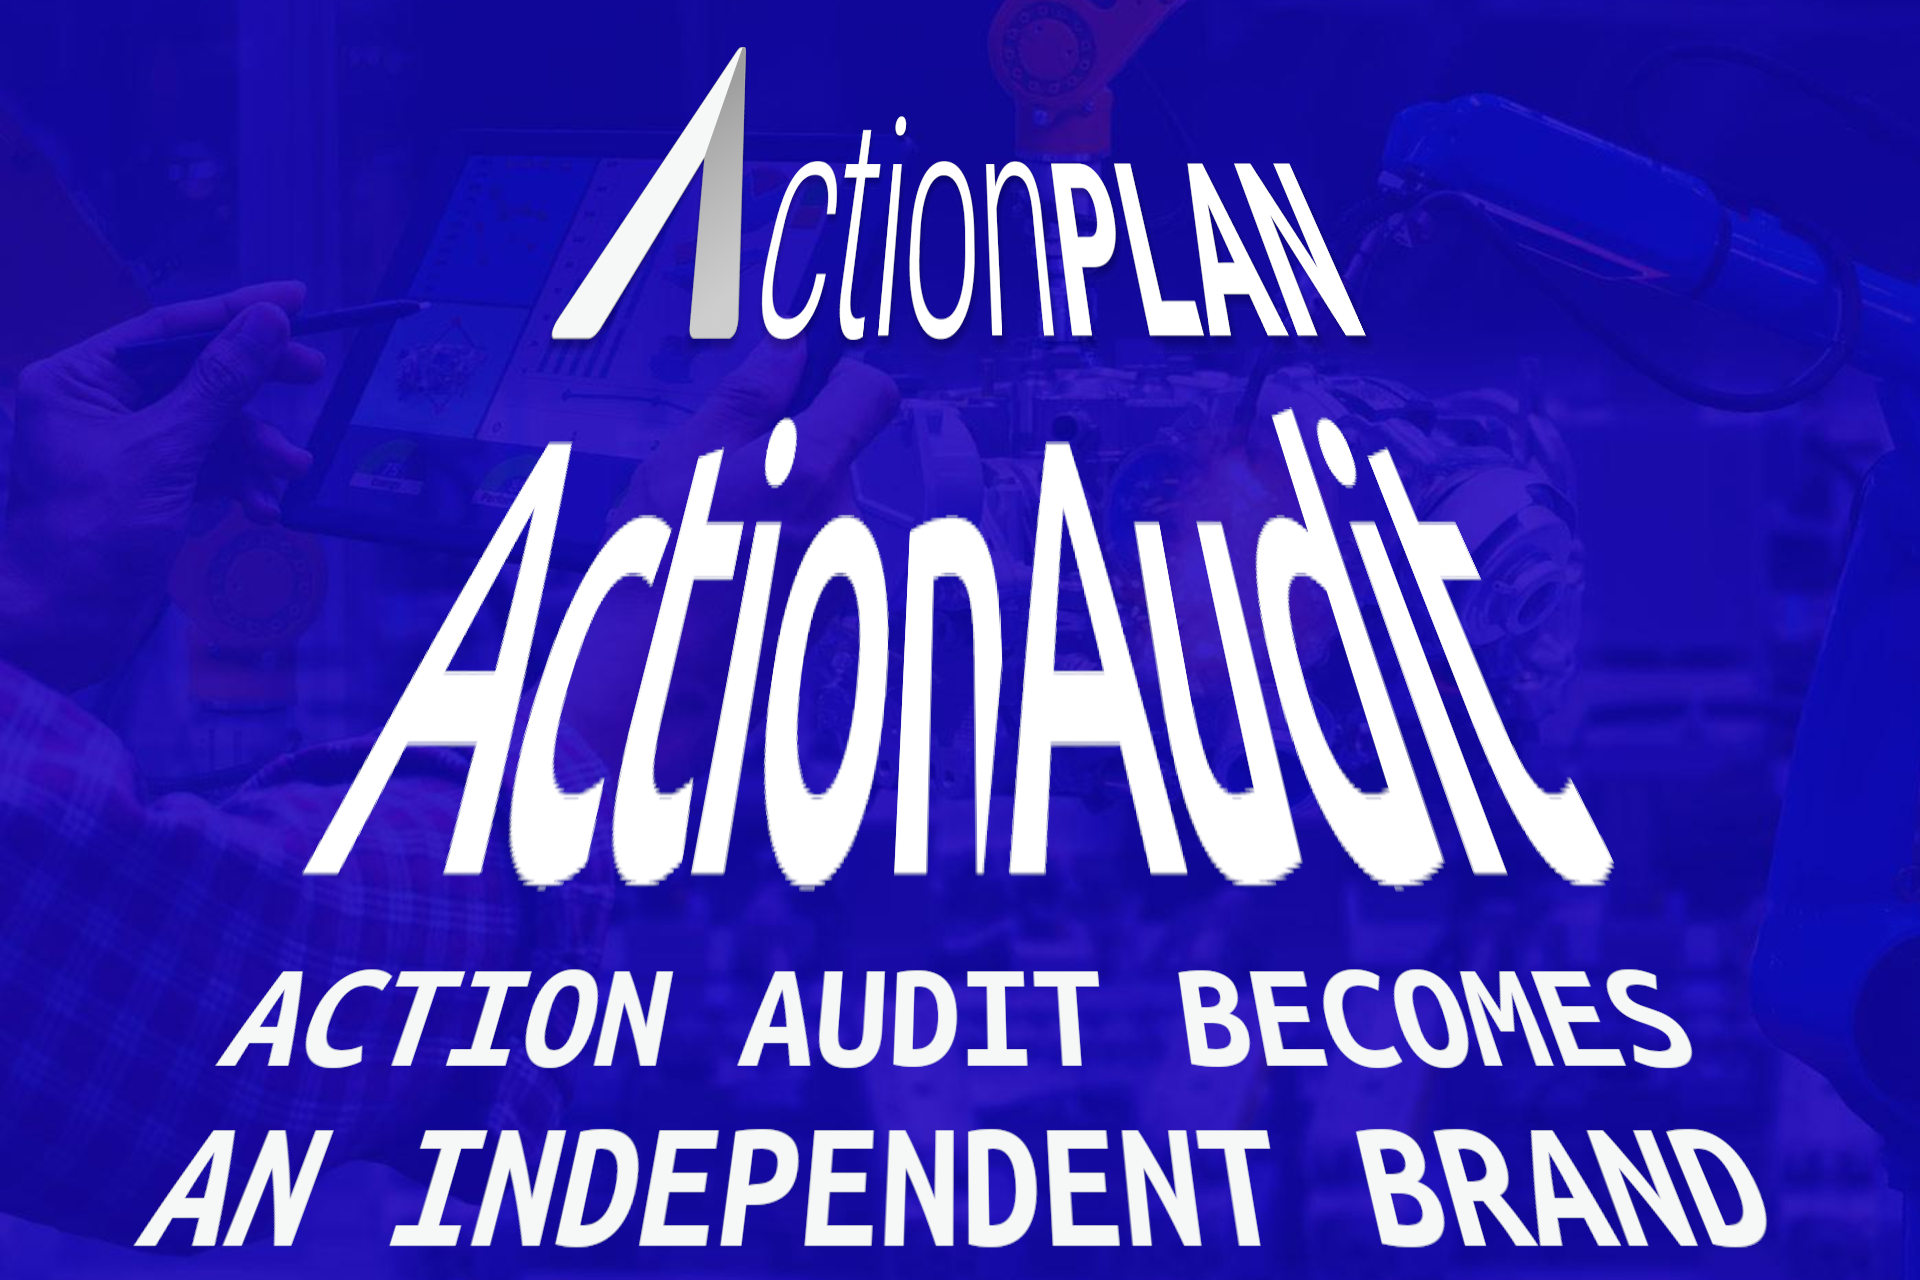 Action Audit becomes an independent brand